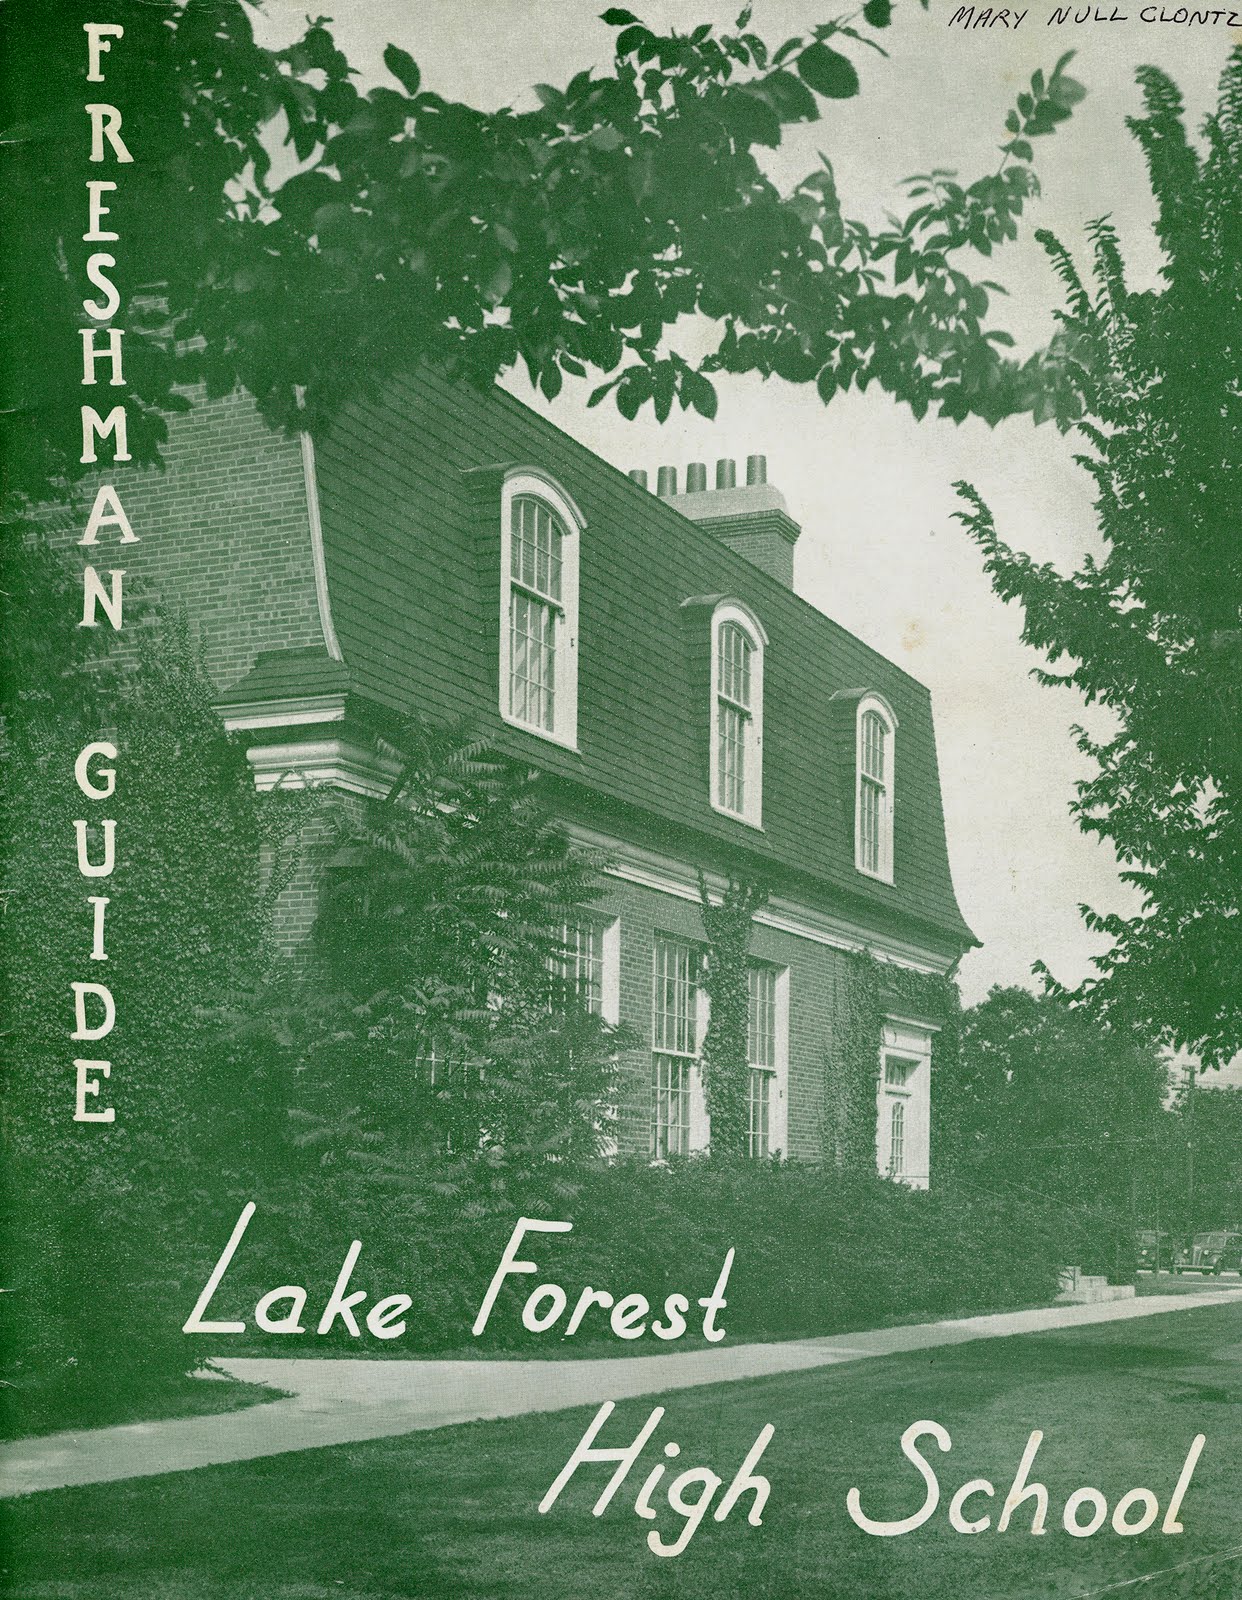 Download this Started High School Lake Forest picture